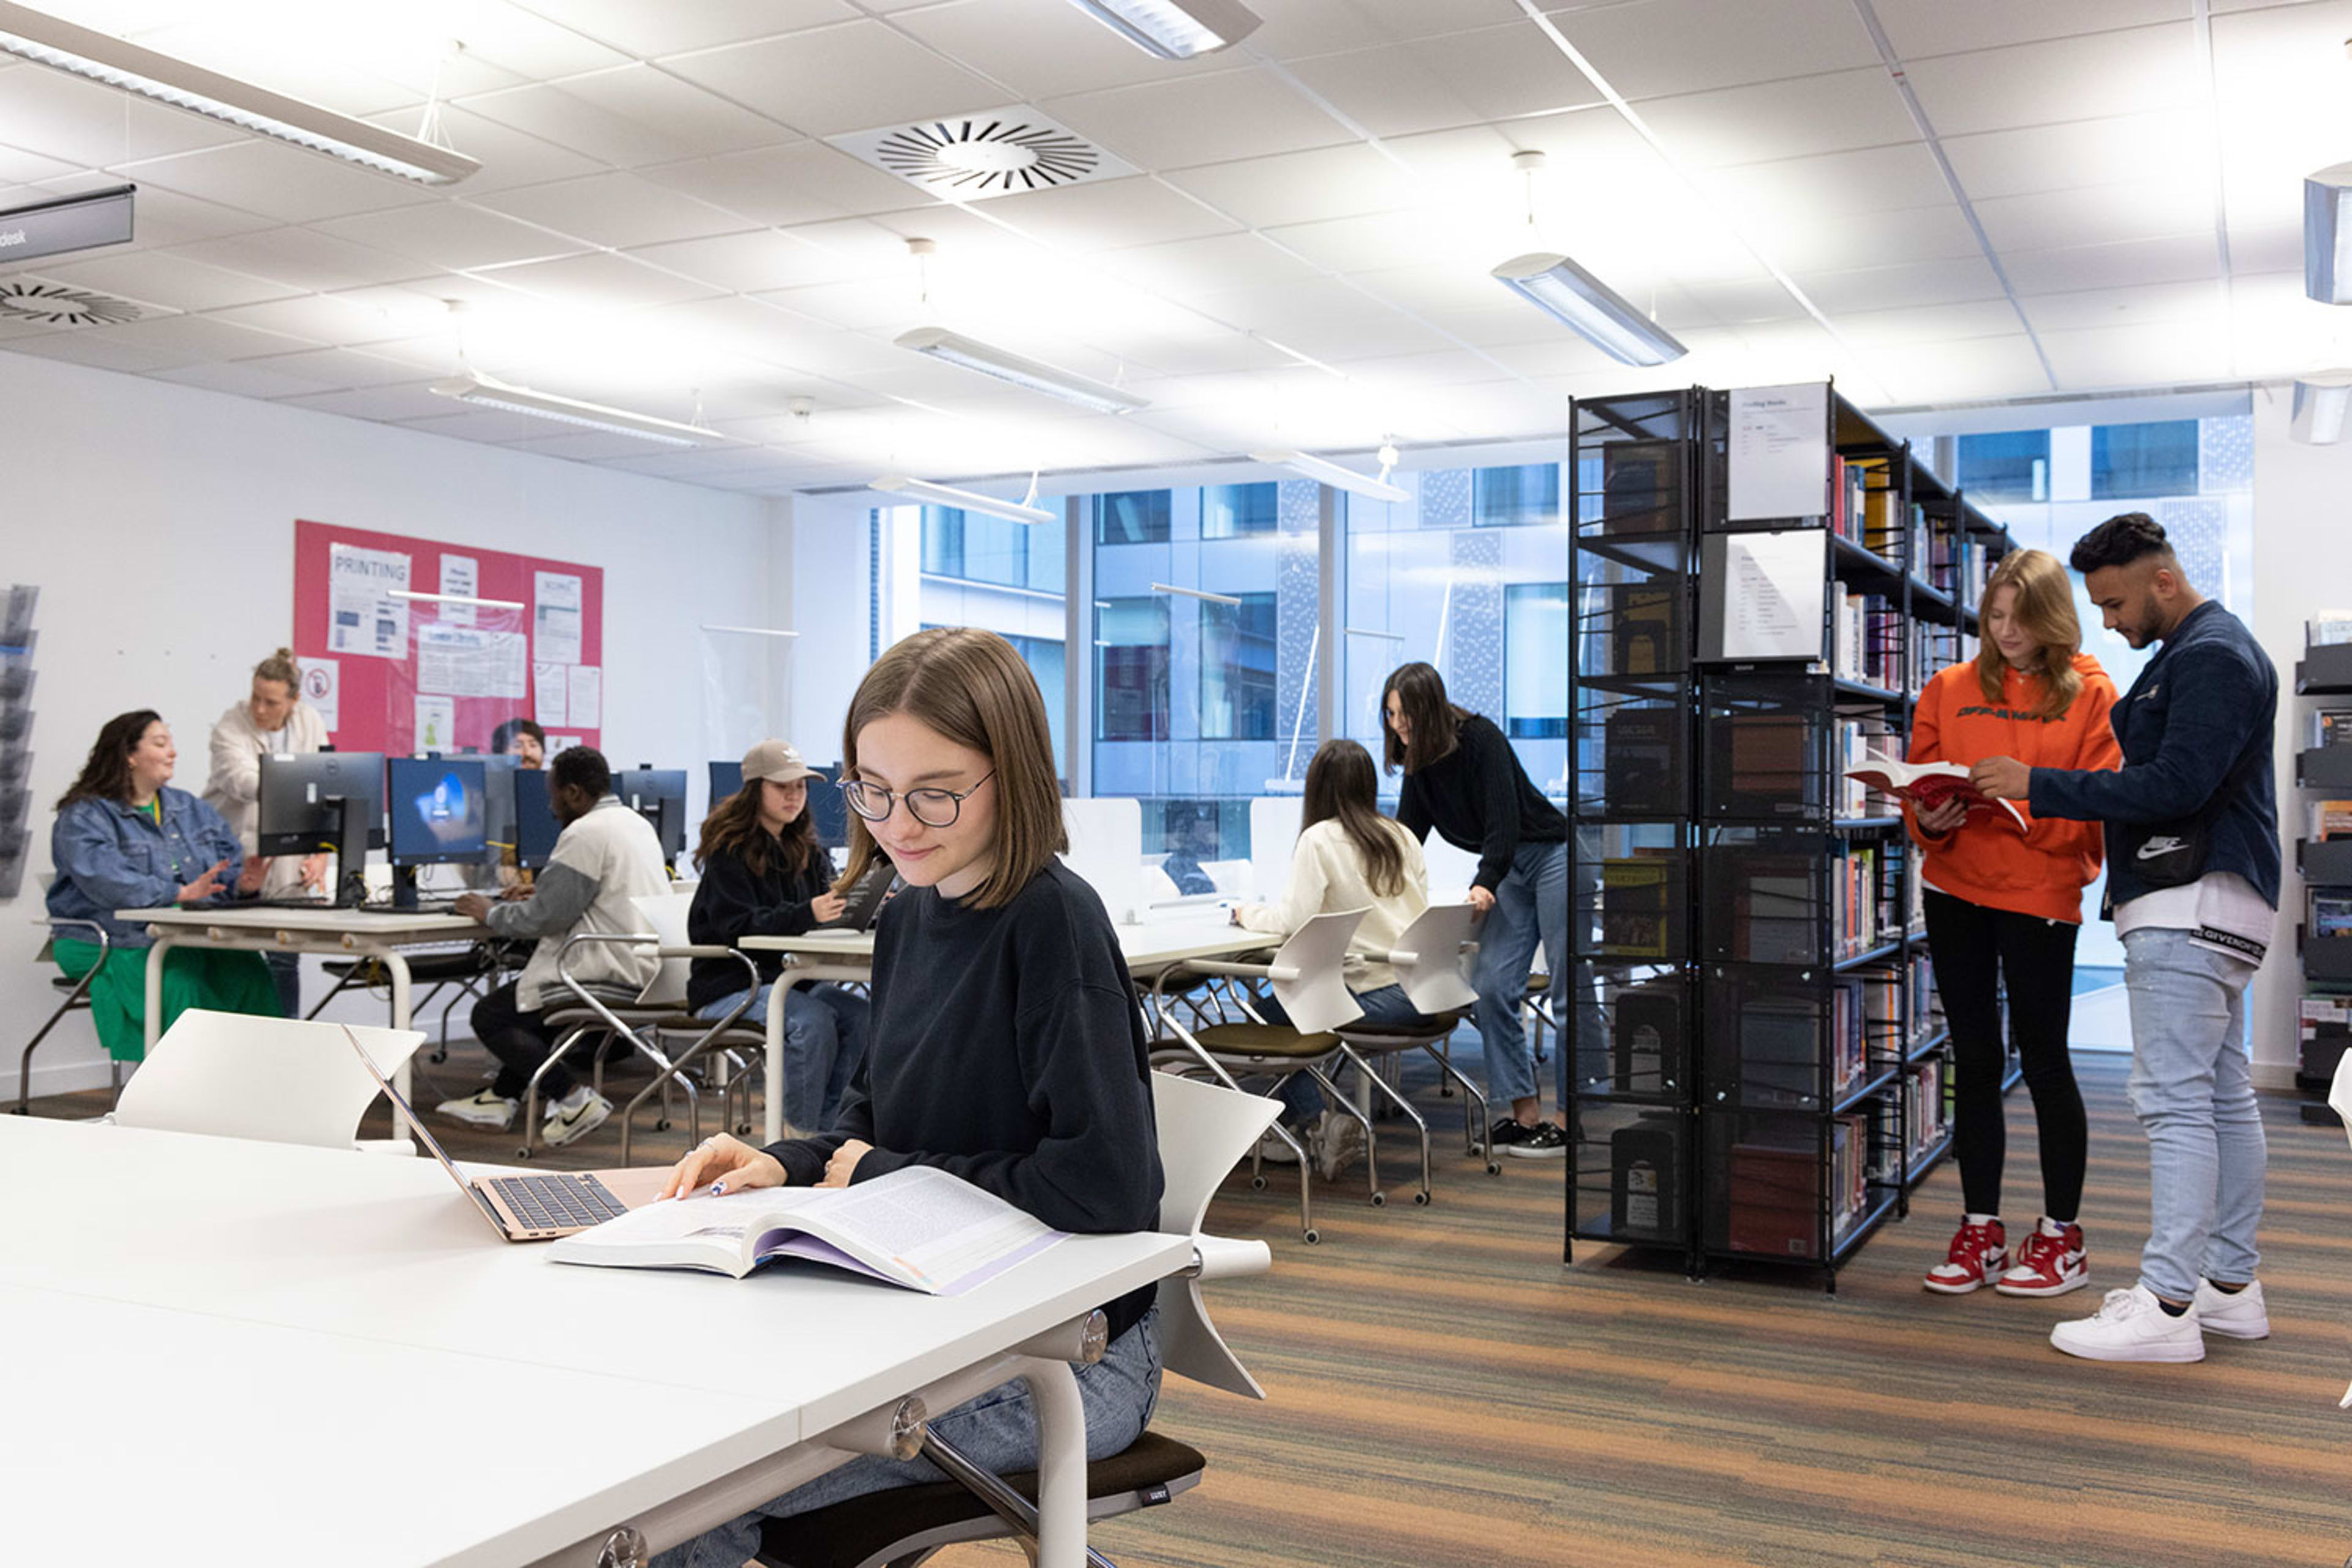 Students studying in the library at INTO London